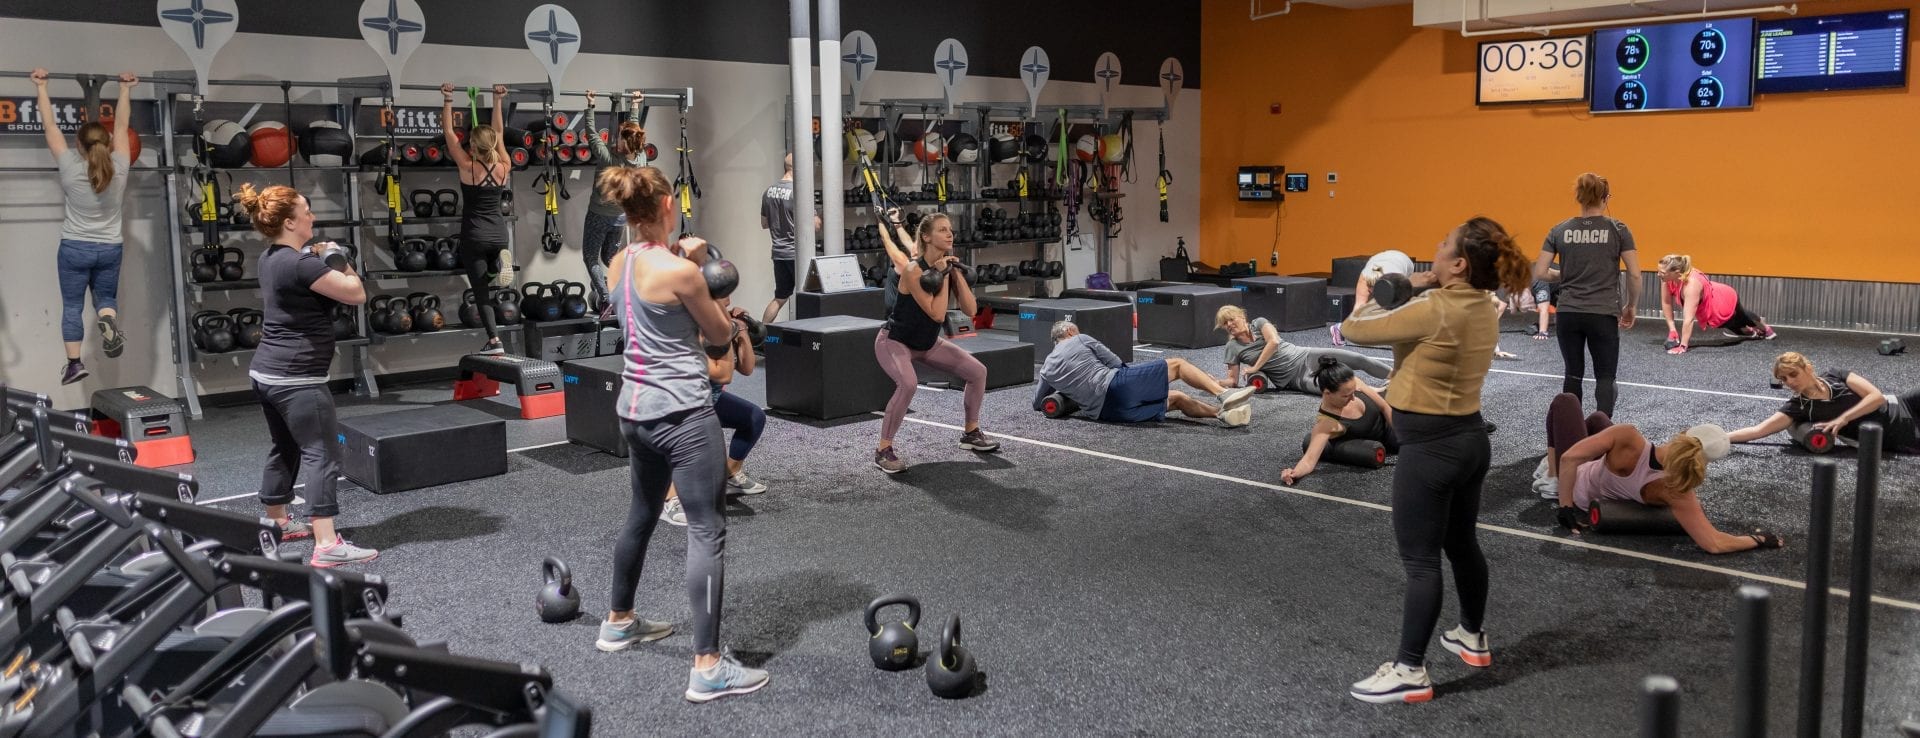 group fitness class at gym near me